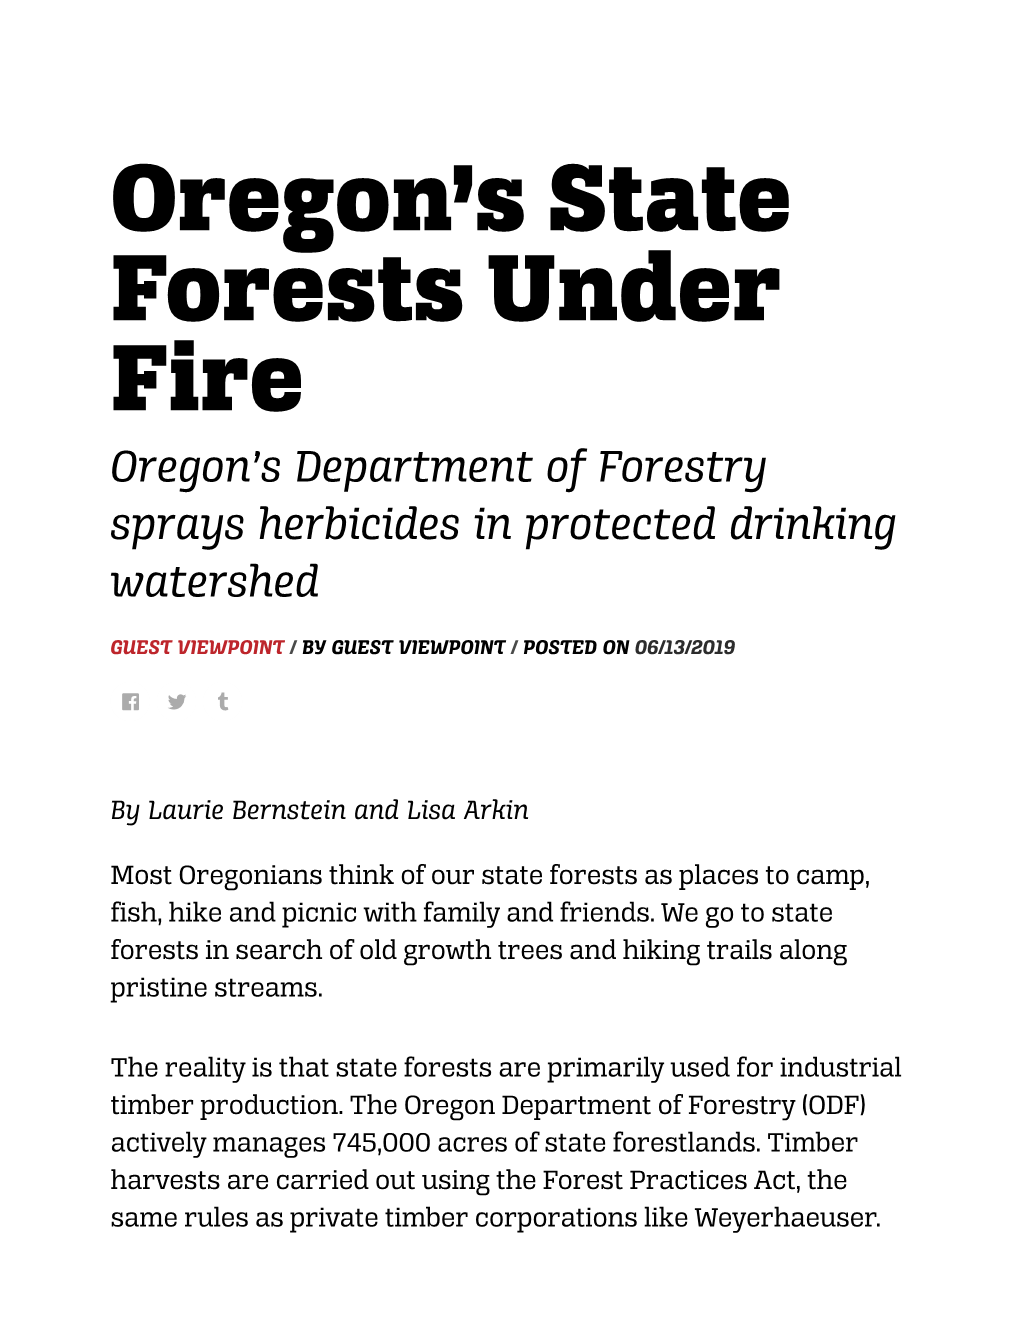 Oregon's State Forests Under Fire